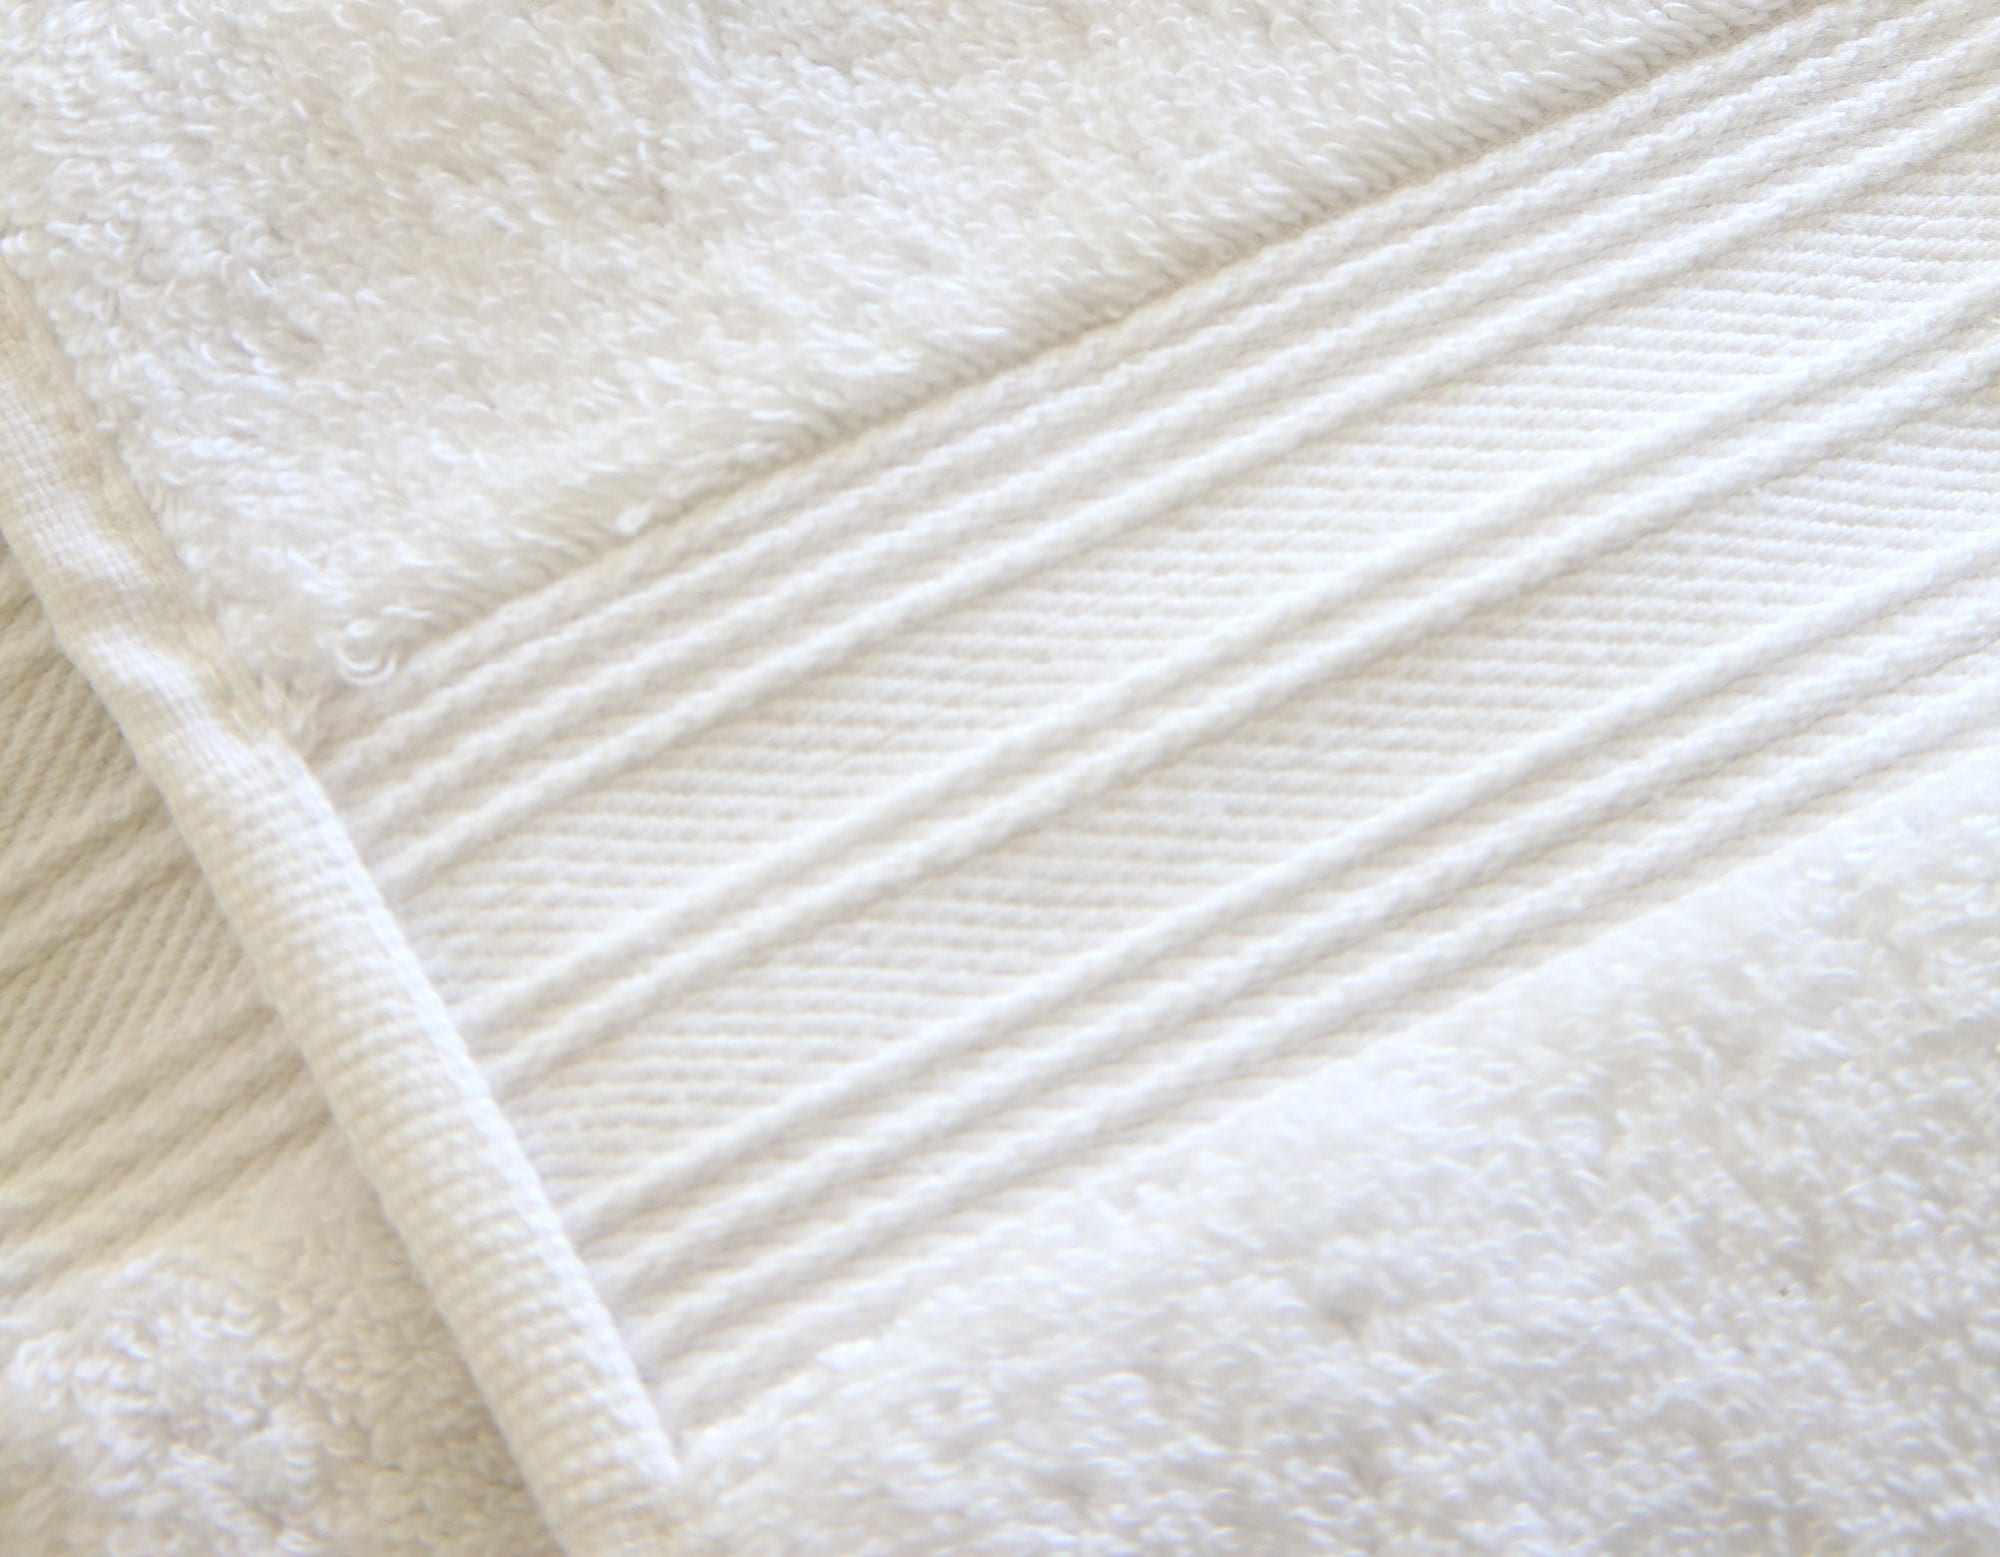 Close-up of white Egyptian cotton hand towel showing hem detail